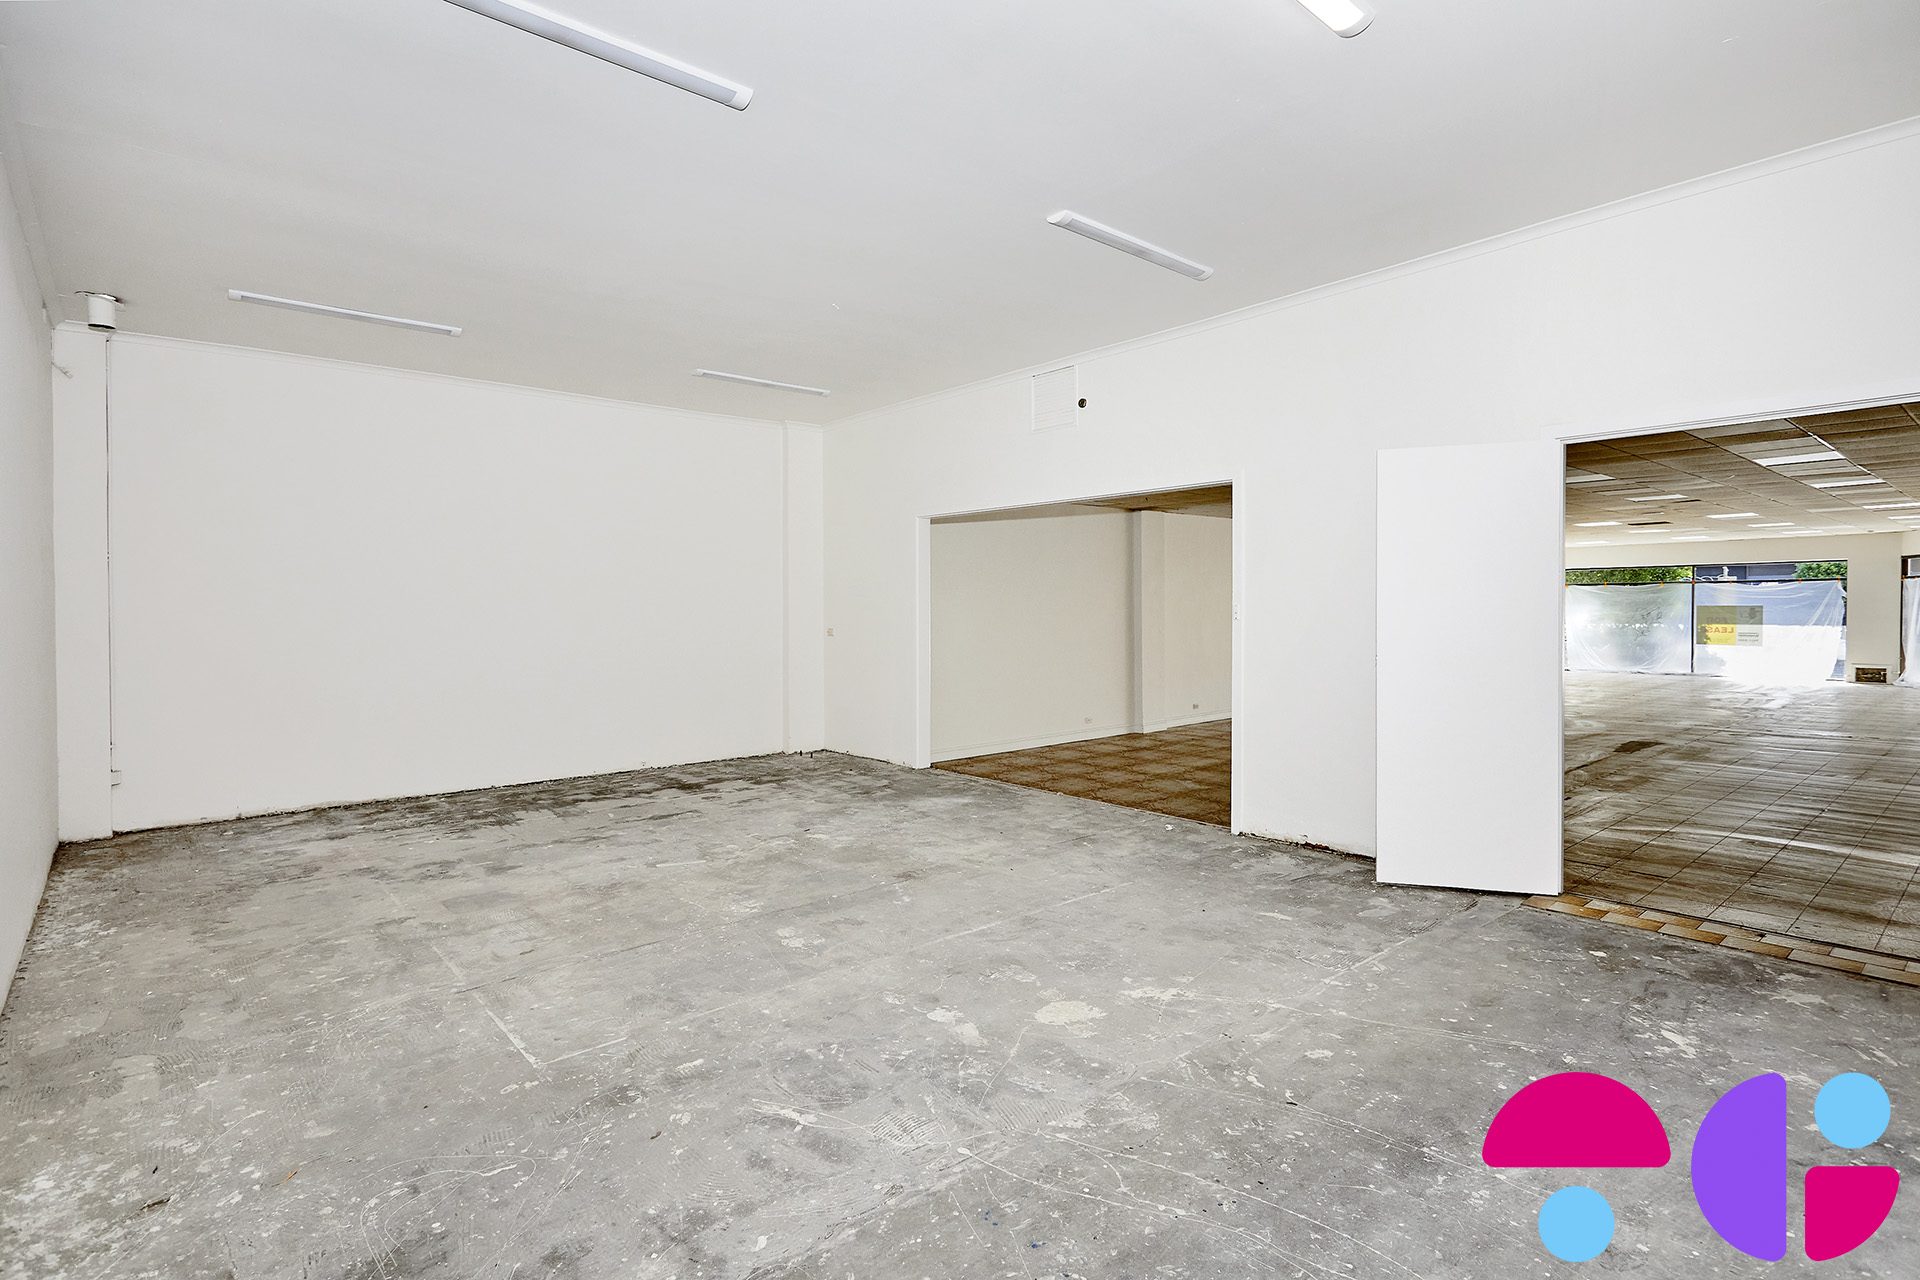 Leased 467-469 Lygon Street Brunswick Retail Office Commercial Real Estate